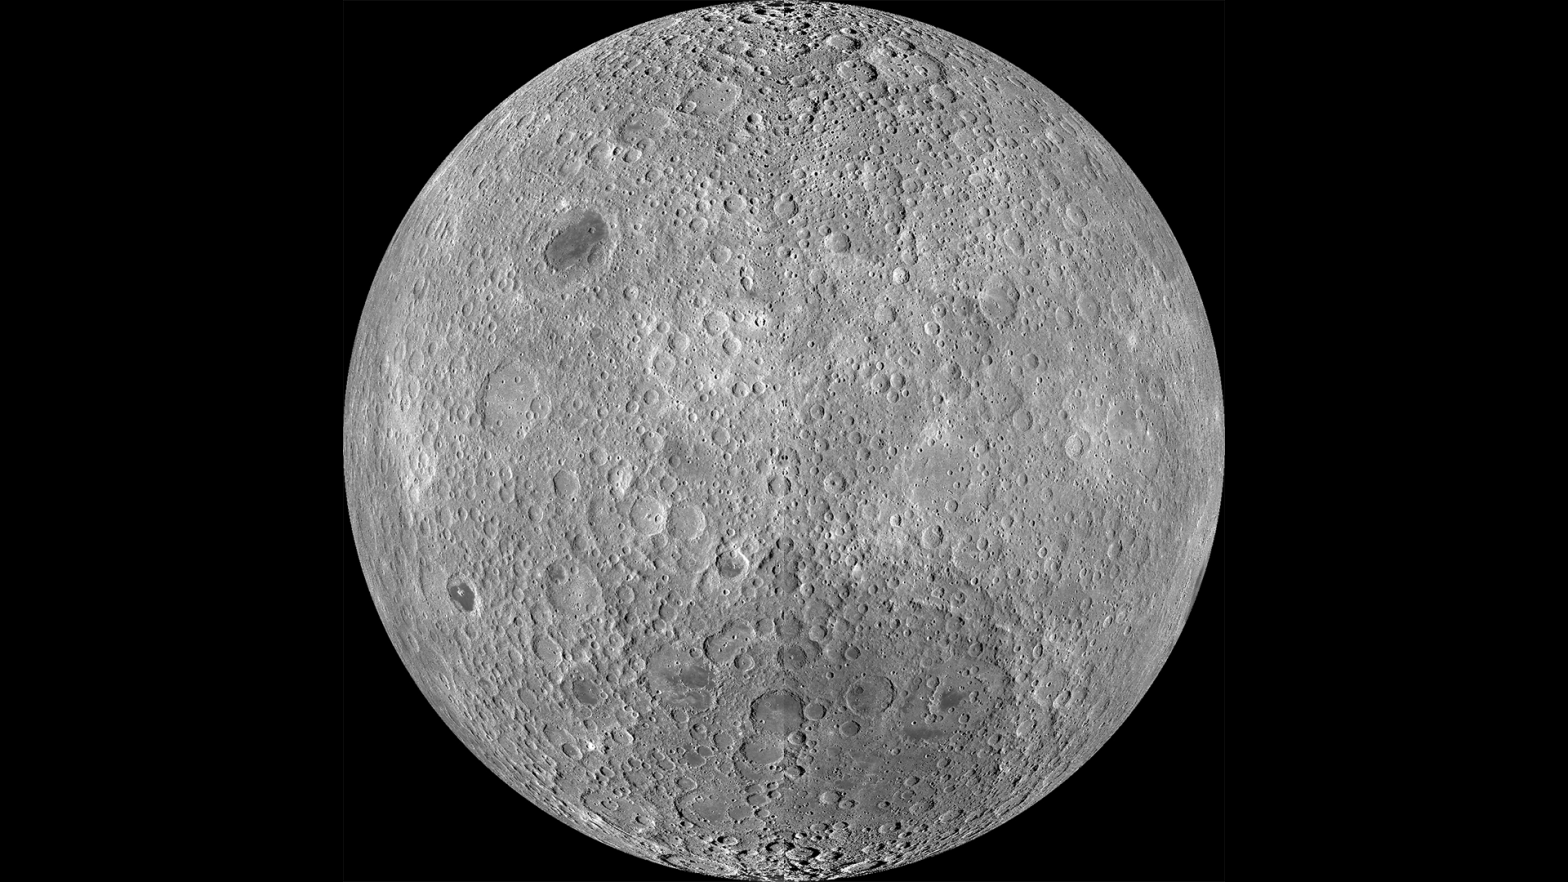 The far side of the Moon, as imaged by the Lunar Reconnaissance Orbiter Camera Wide Angle Camera. (Image: NASA/Goddard/Arizona State University)